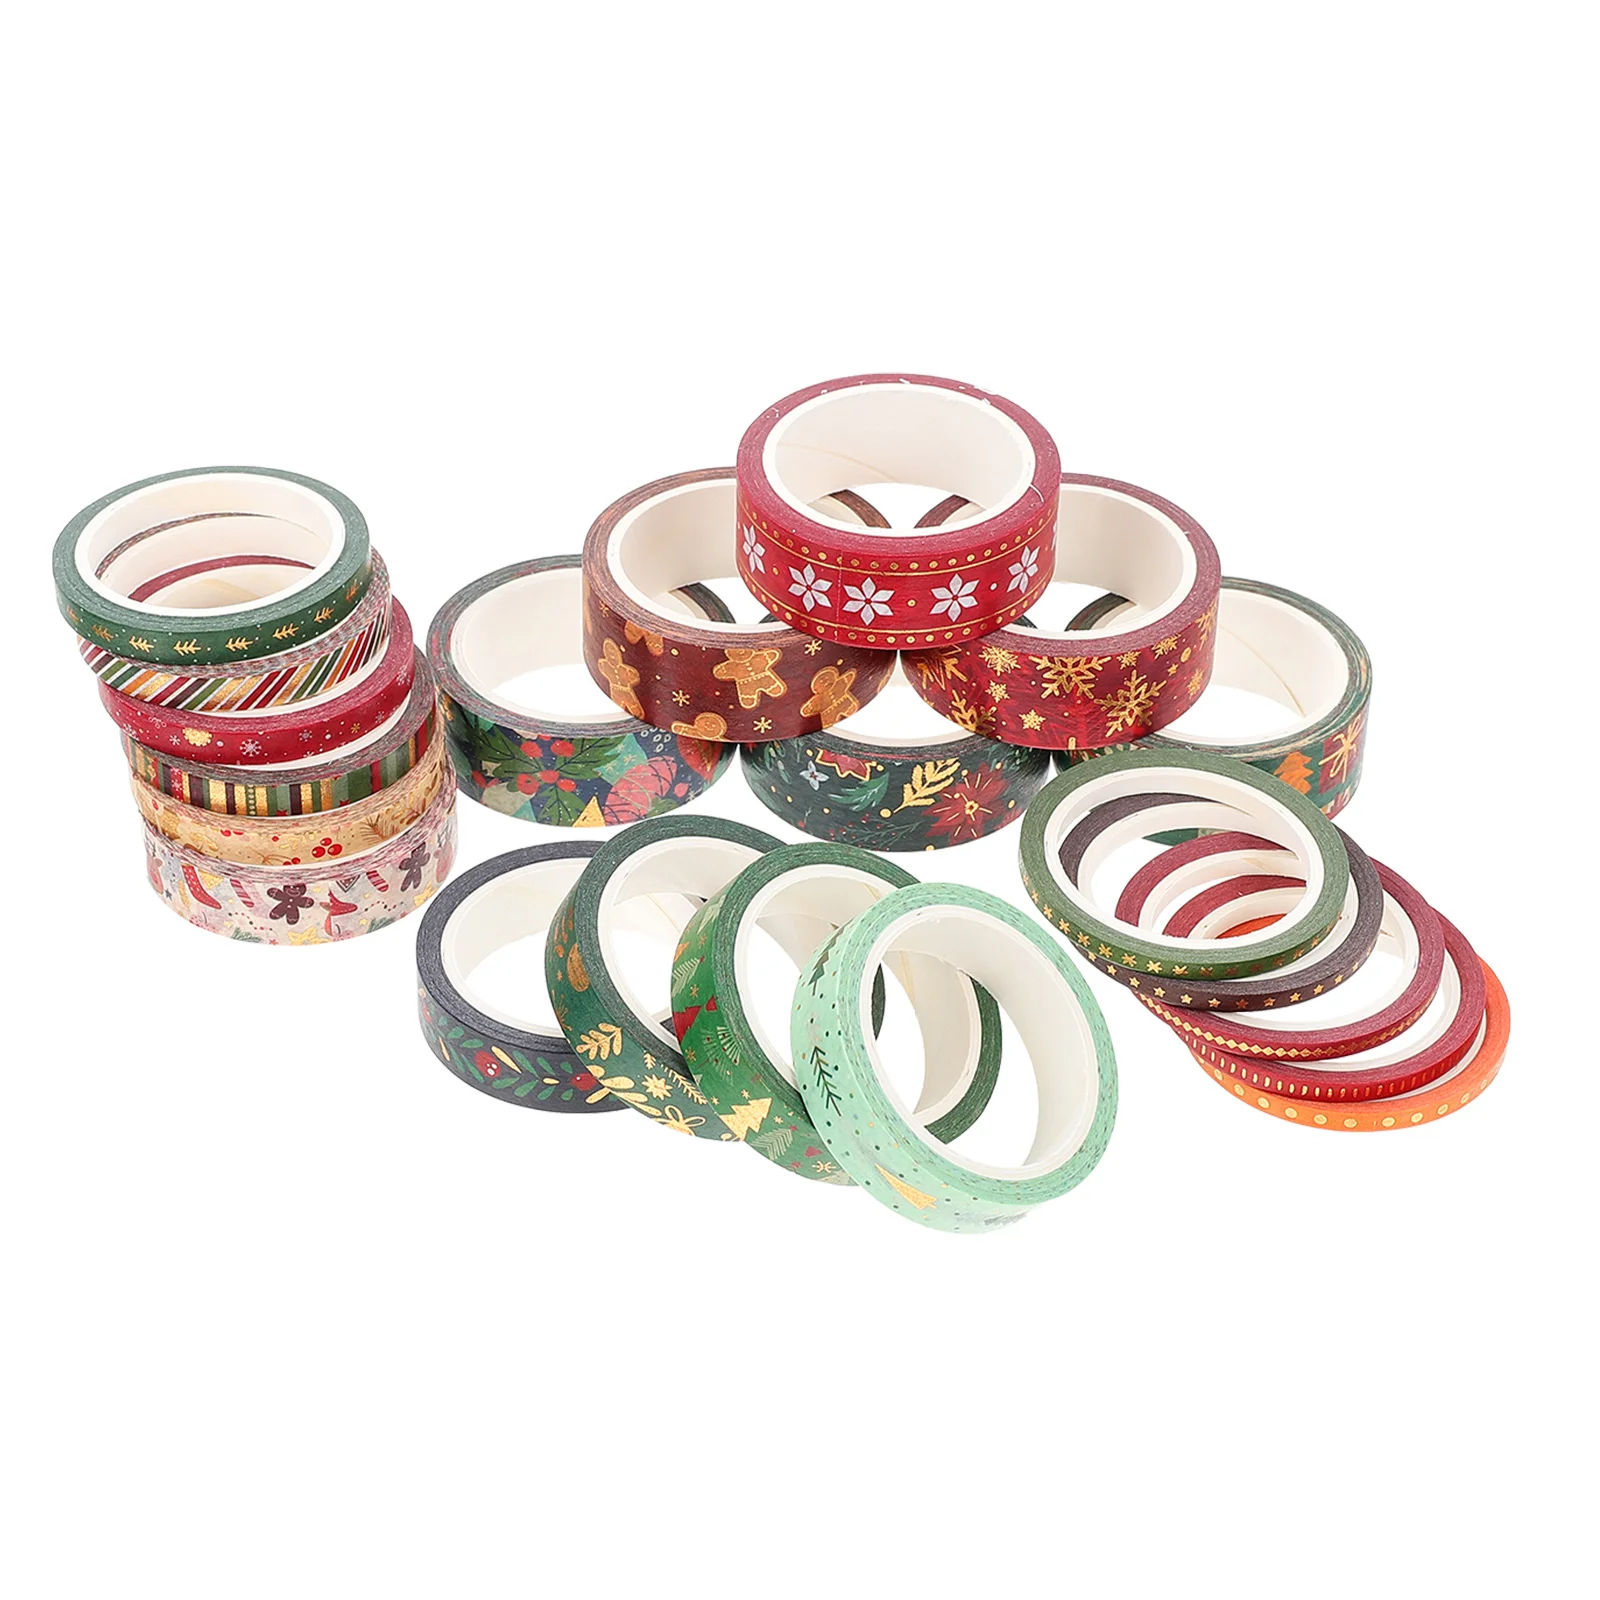 

21 Rolls Christmas Washi Tape Gift Wrapping Tapes Themed Japanese Paper Xmas Decorative Adhesive Party Supplies Retro